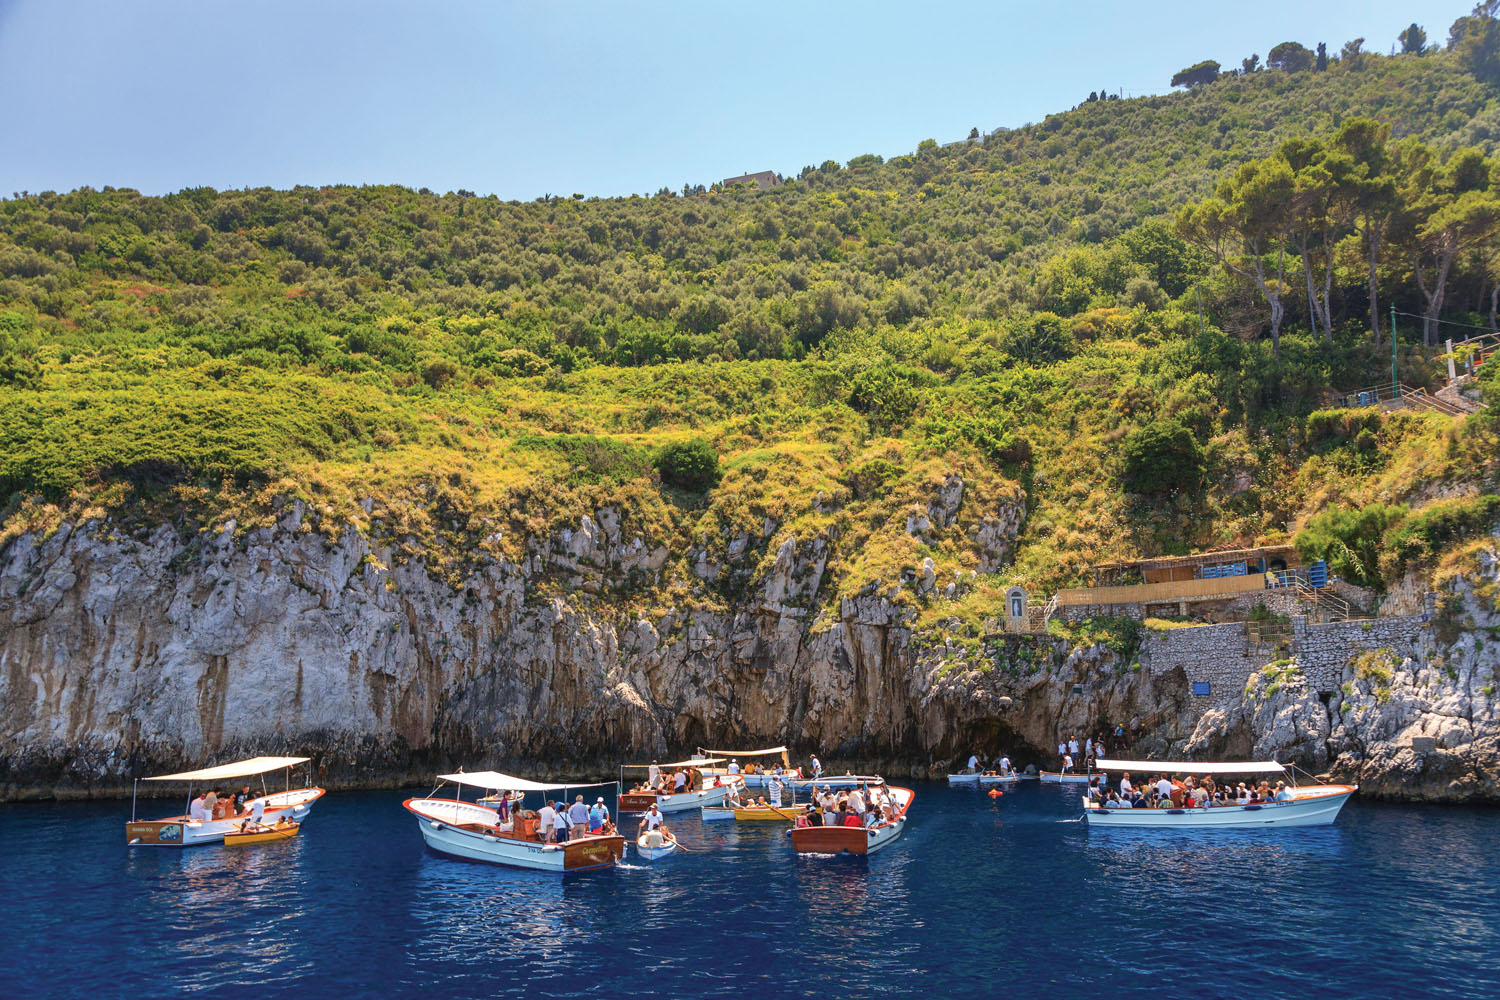 2F762GN Tourists waiting to enter the Blue Grotto (Grotta Azzurra) by rowing boat on the Island of Capri, Italy, Amalfi Coast